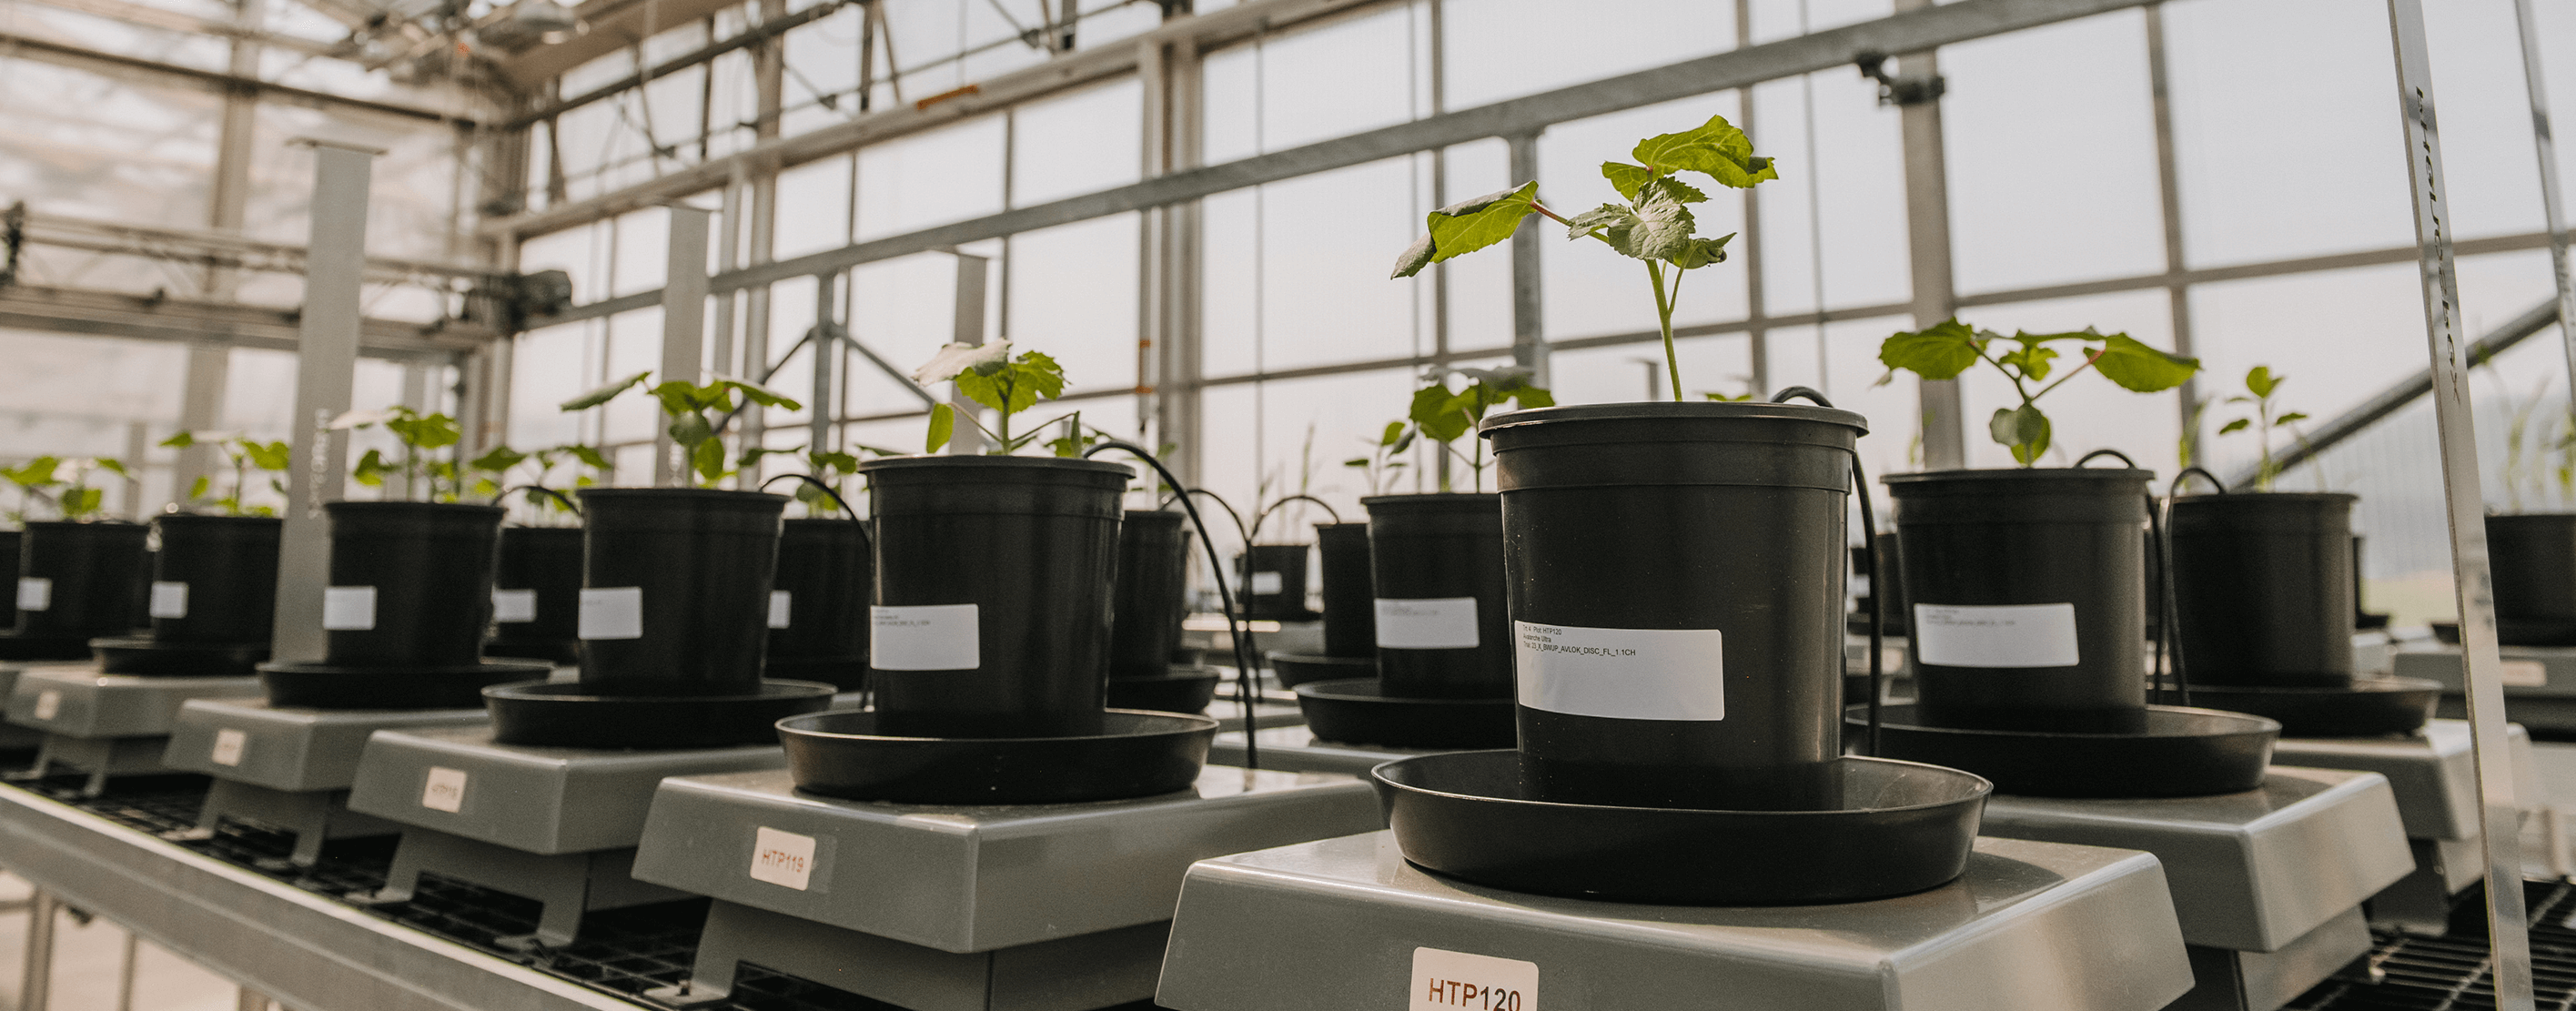 Plants Inside The WinField United Research Lab